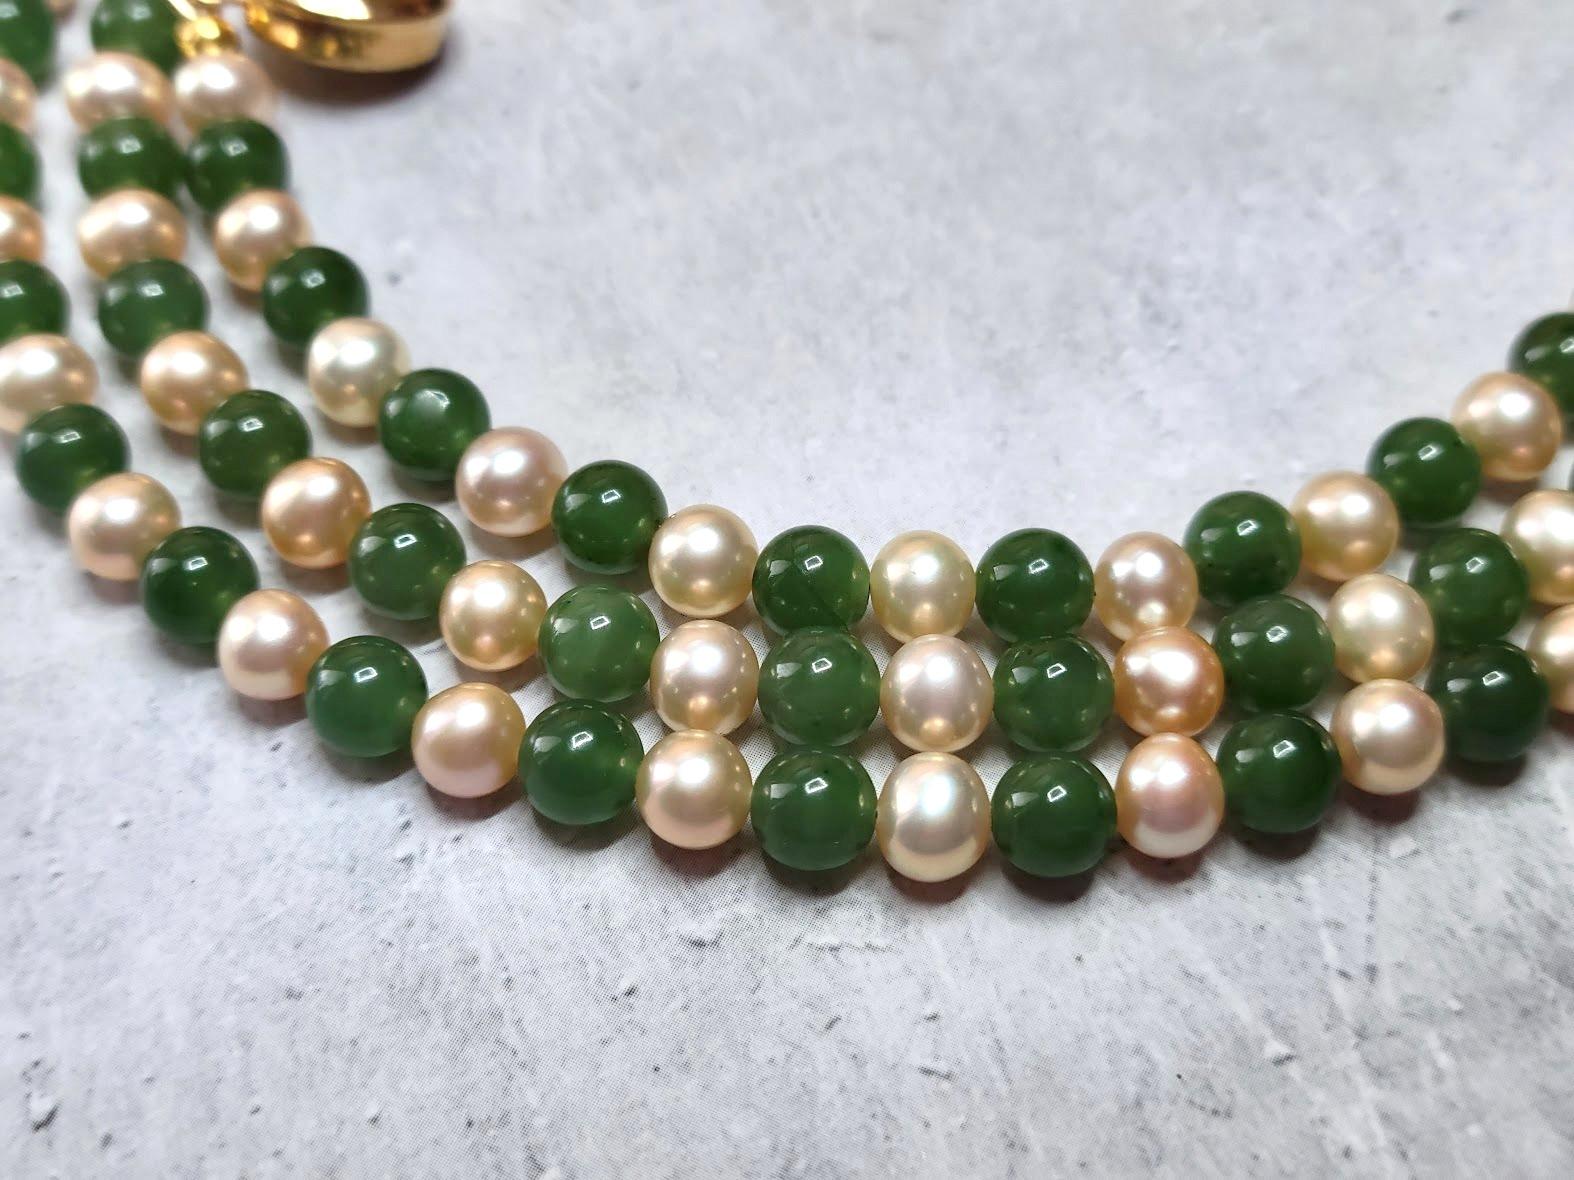 This beautiful, elegant, classic, long necklace is made of natural freshwater peach pearls and natural Russian green nephrite of very high quality from Siberia. The nephrite beads are pure, uniform, soft green color, delicate and shiny, and they're